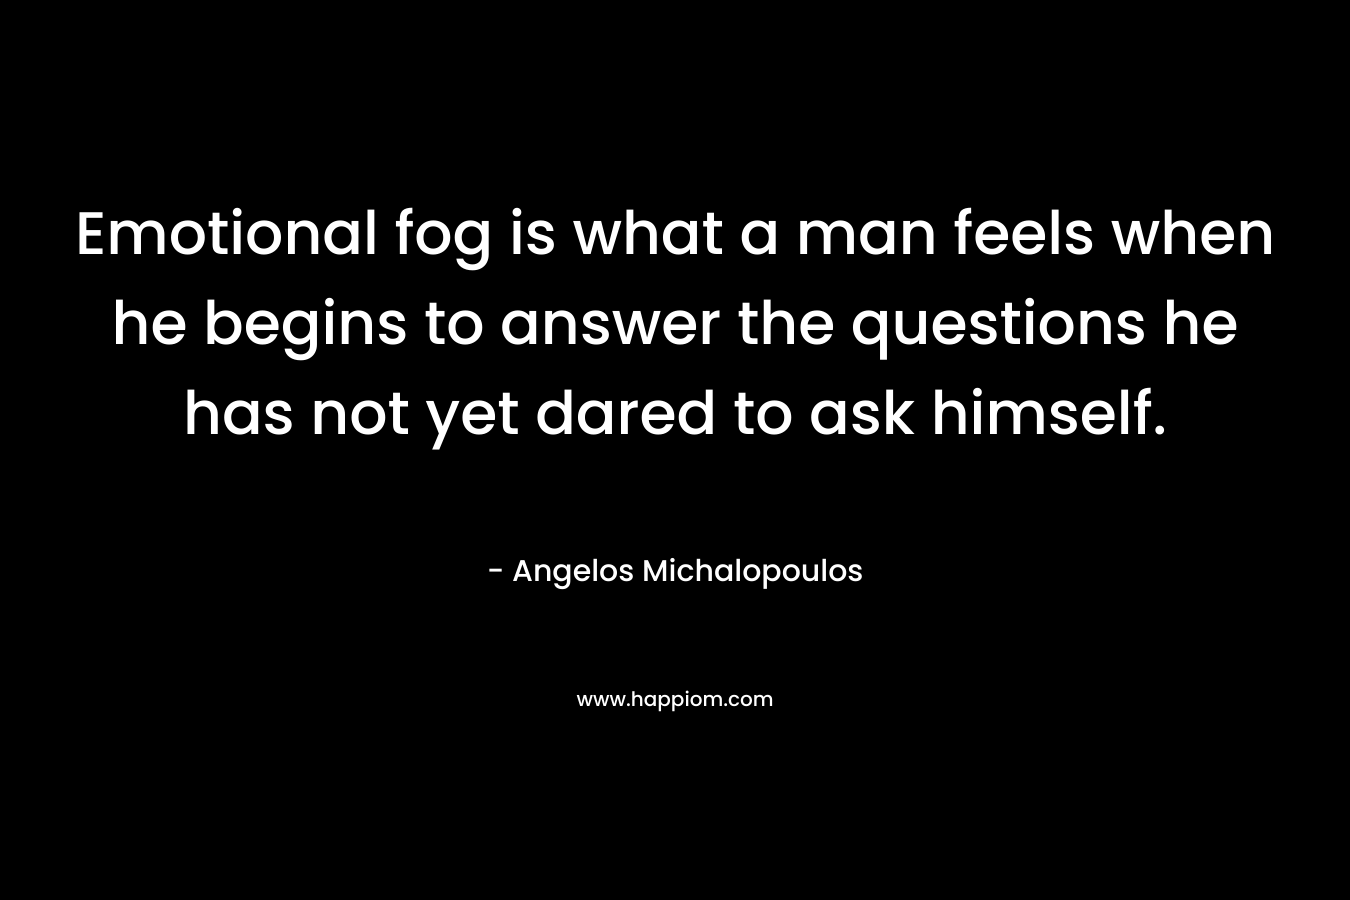 Emotional fog is what a man feels when he begins to answer the questions he has not yet dared to ask himself. – Angelos Michalopoulos